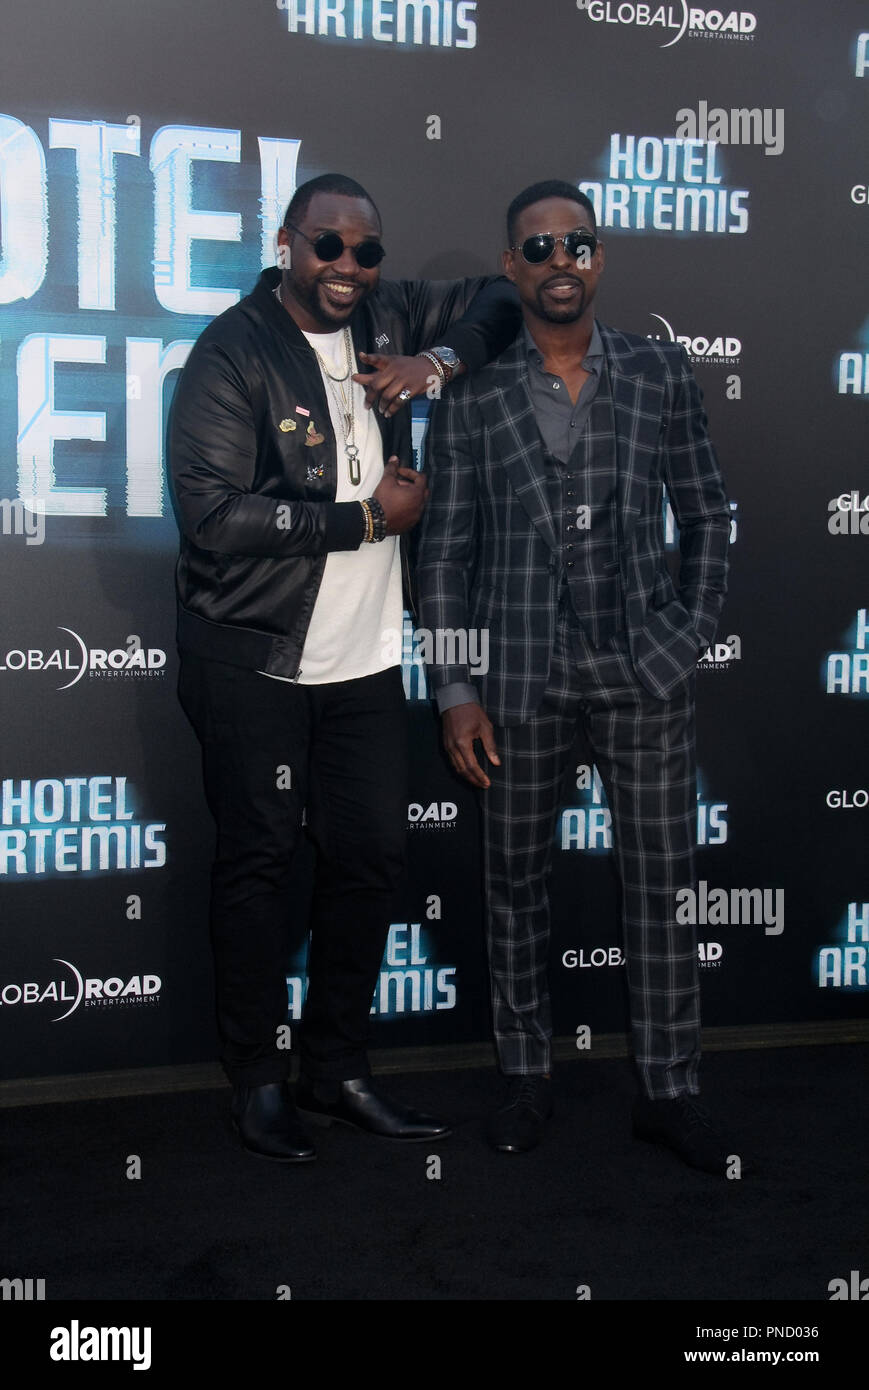 Brian Tyree Henry, Sterling K. Brown  05/19/2018 The Los Angeles premiere of 'Hotel Artemis' held at the Regency Bruin Theatre in Los Angeles, CA Photo by Izumi Hasegawa / HNW / PictureLux Stock Photo